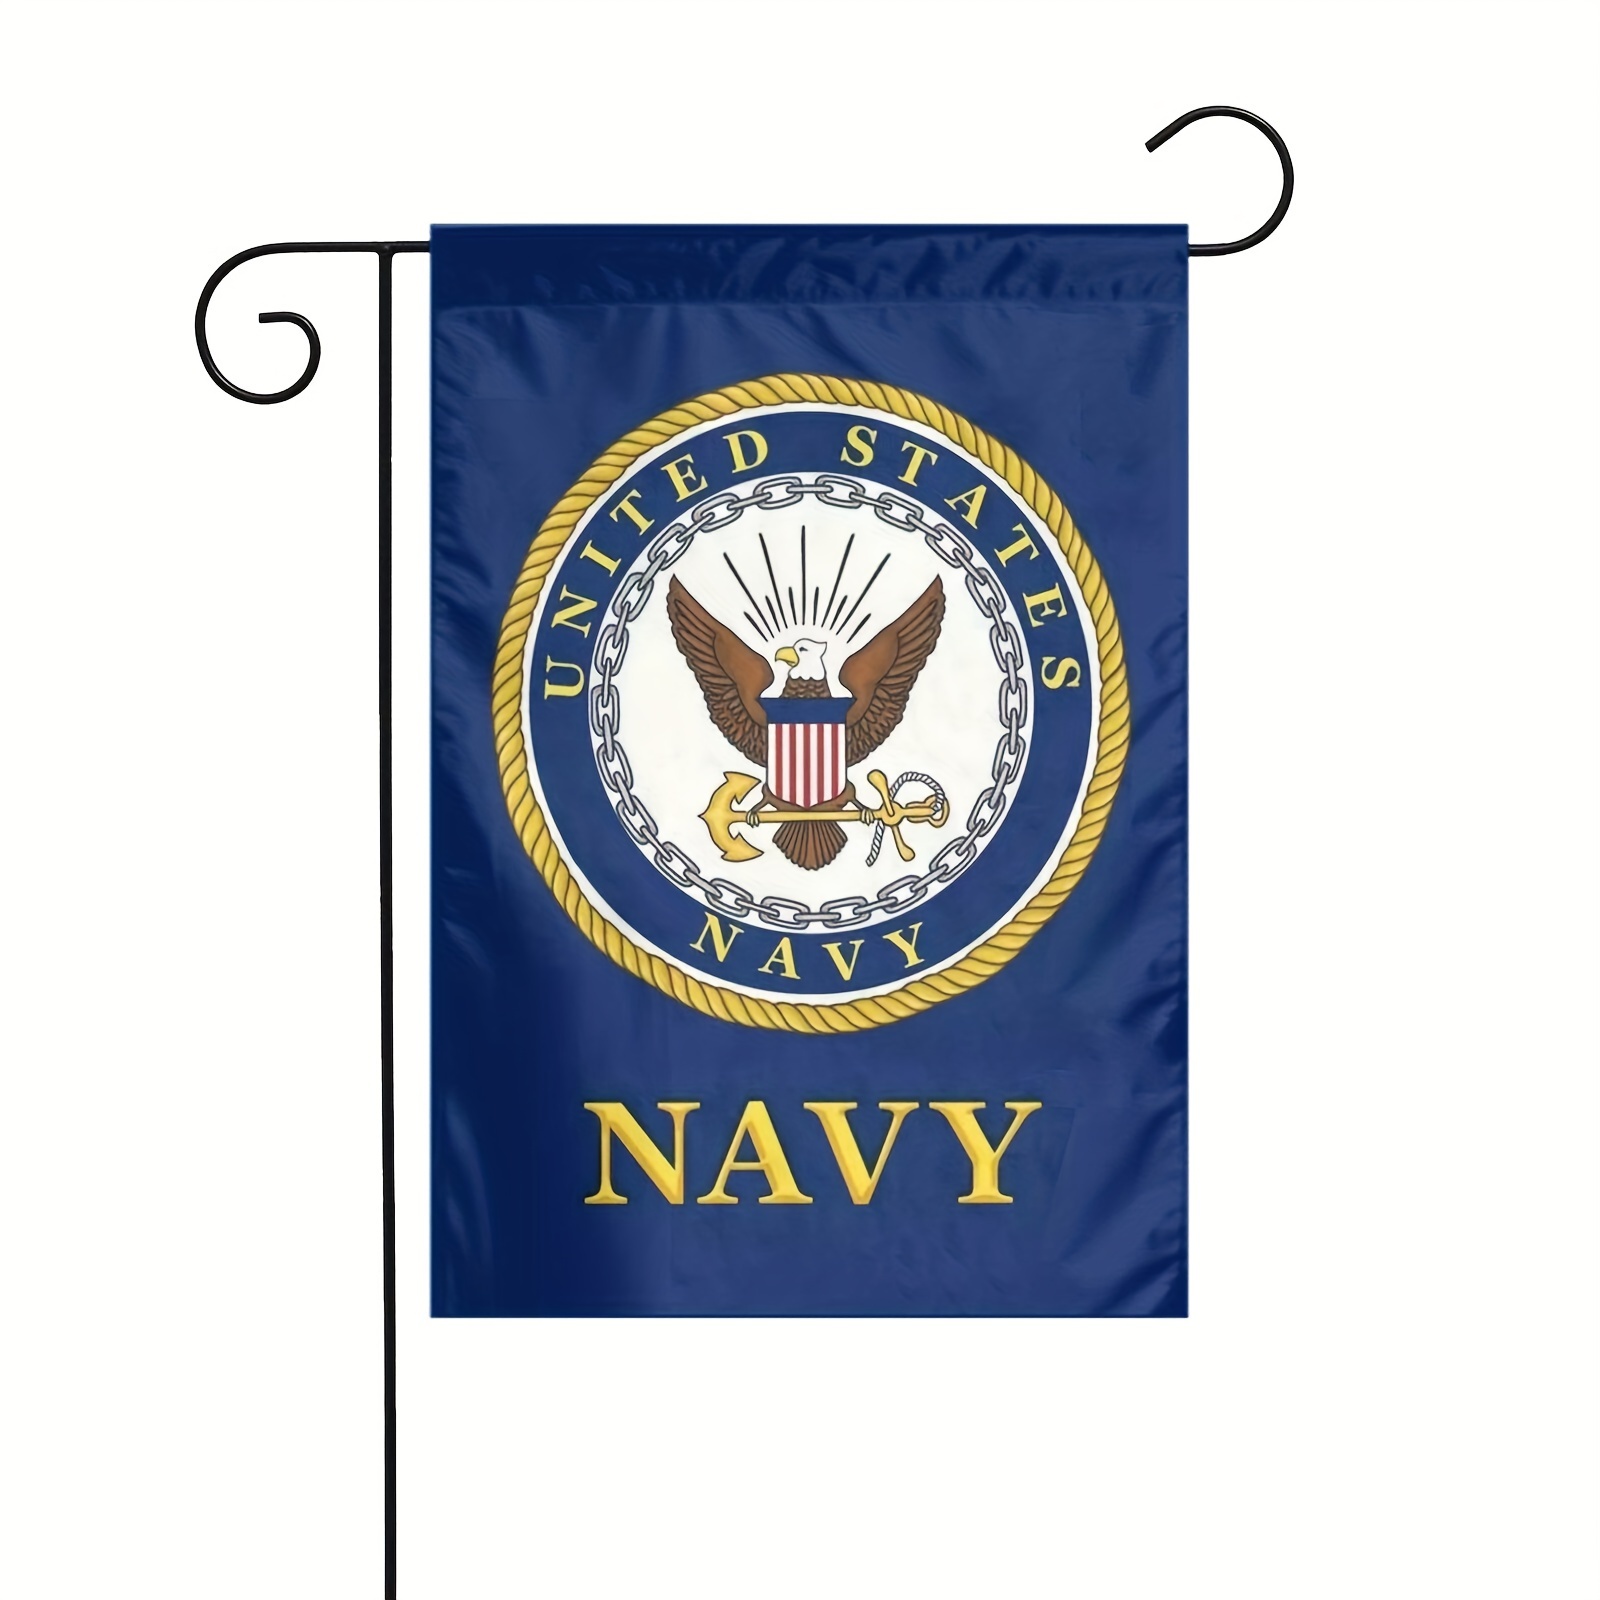 

Polyester Garden Flag - 12x18 Inch Double-sided Outdoor Yard Decoration, Multipurpose Fabric Banner With Military Emblem, Weather-resistant, No Electricity Needed